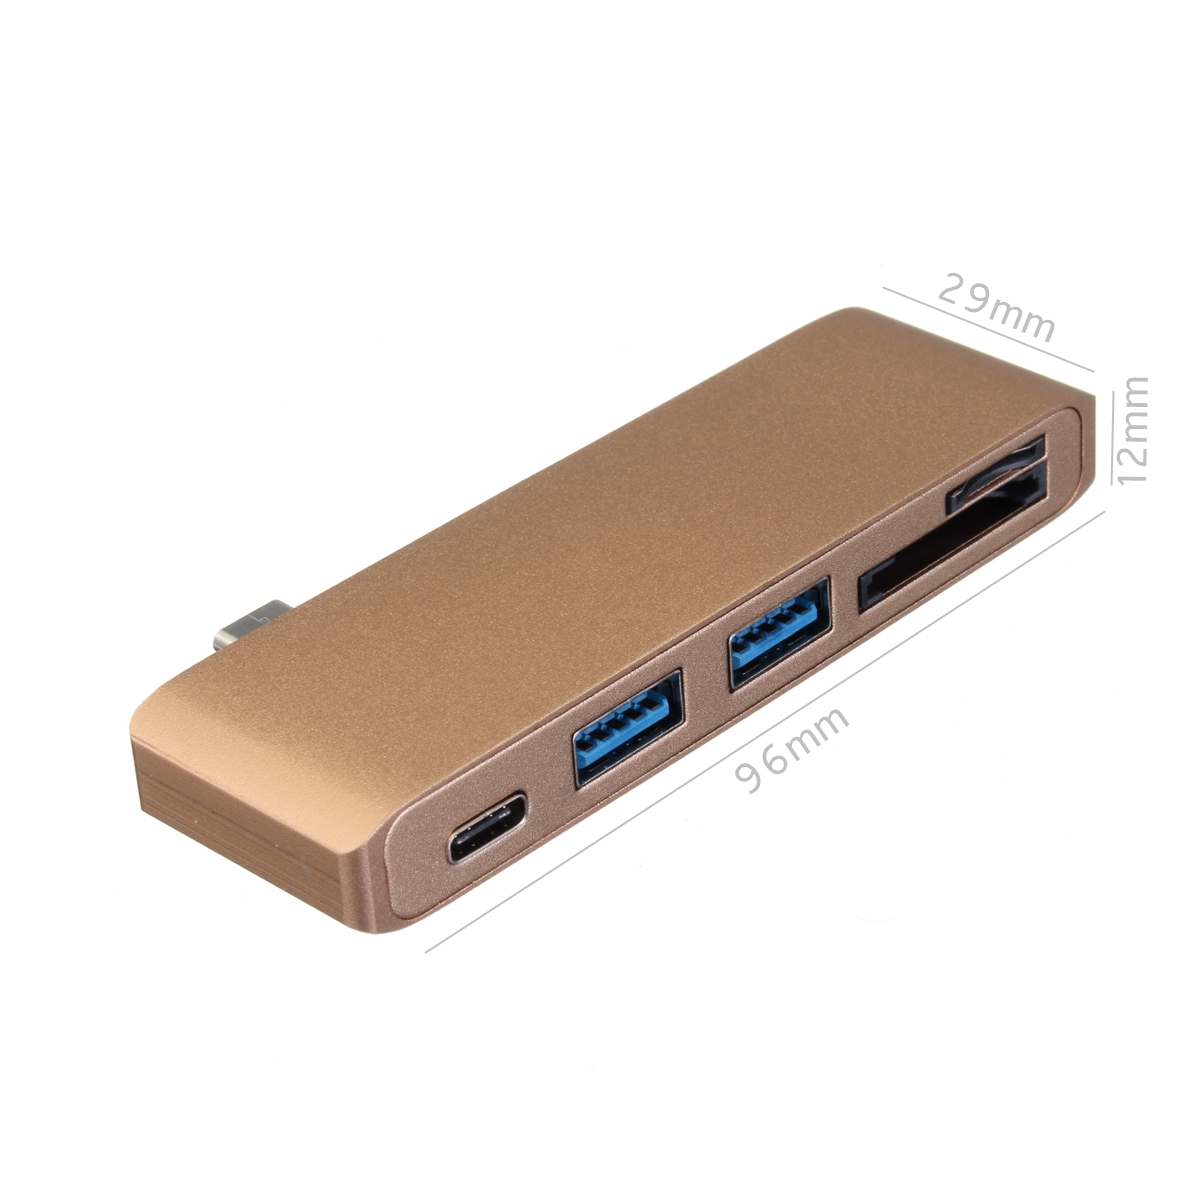 Multifunction USB Hub Type-C to Type-C USB 3.0 2Ports TF SD Card Reader for Laptop PC 67